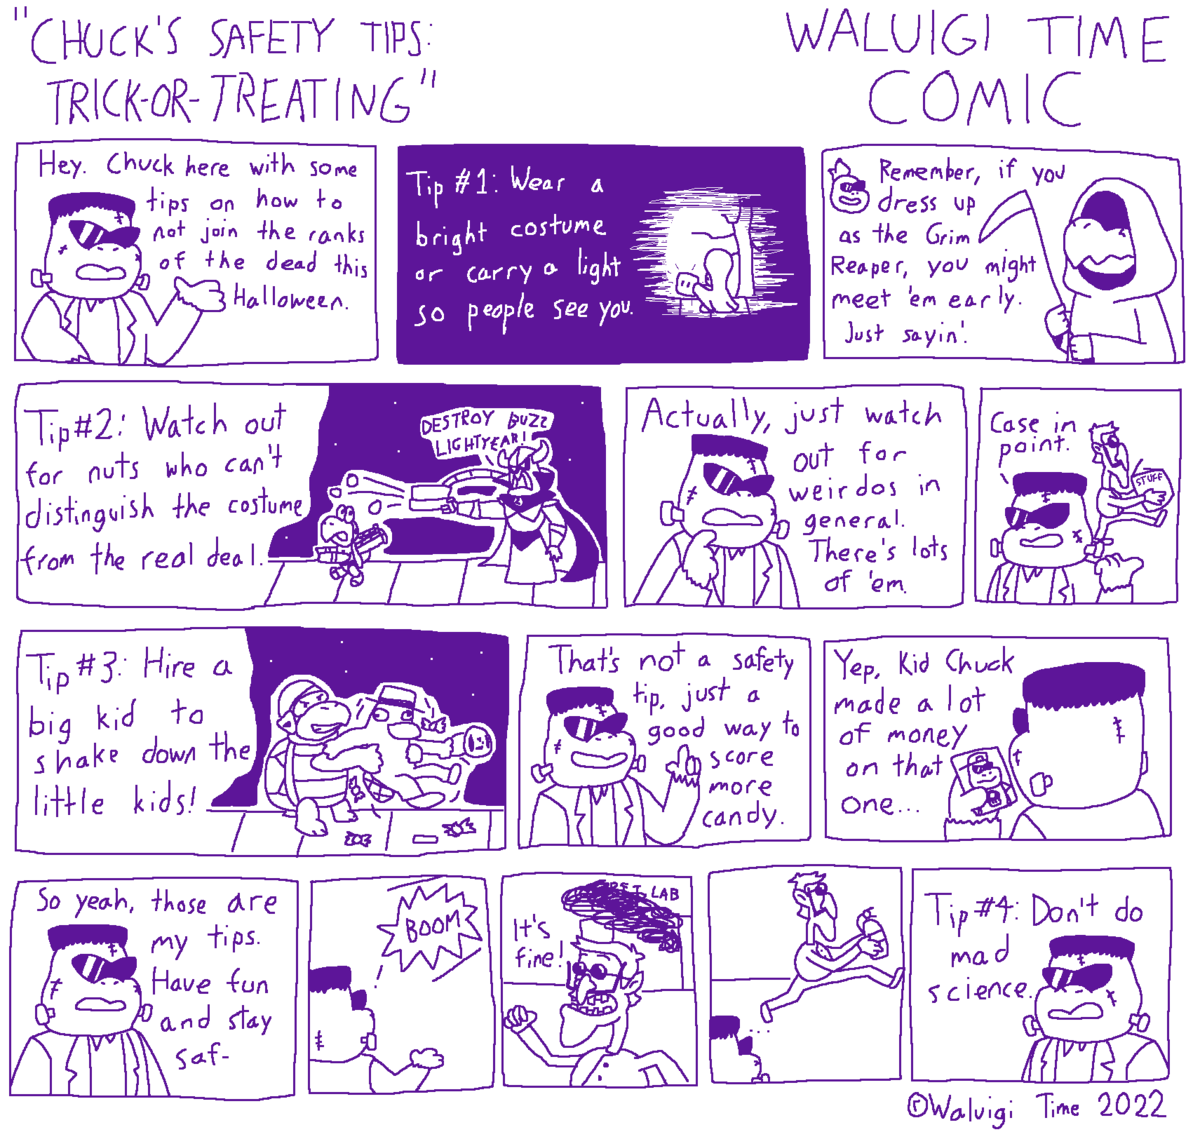 WTComic-ChucksSafetyTipsTrickOrTreating.png